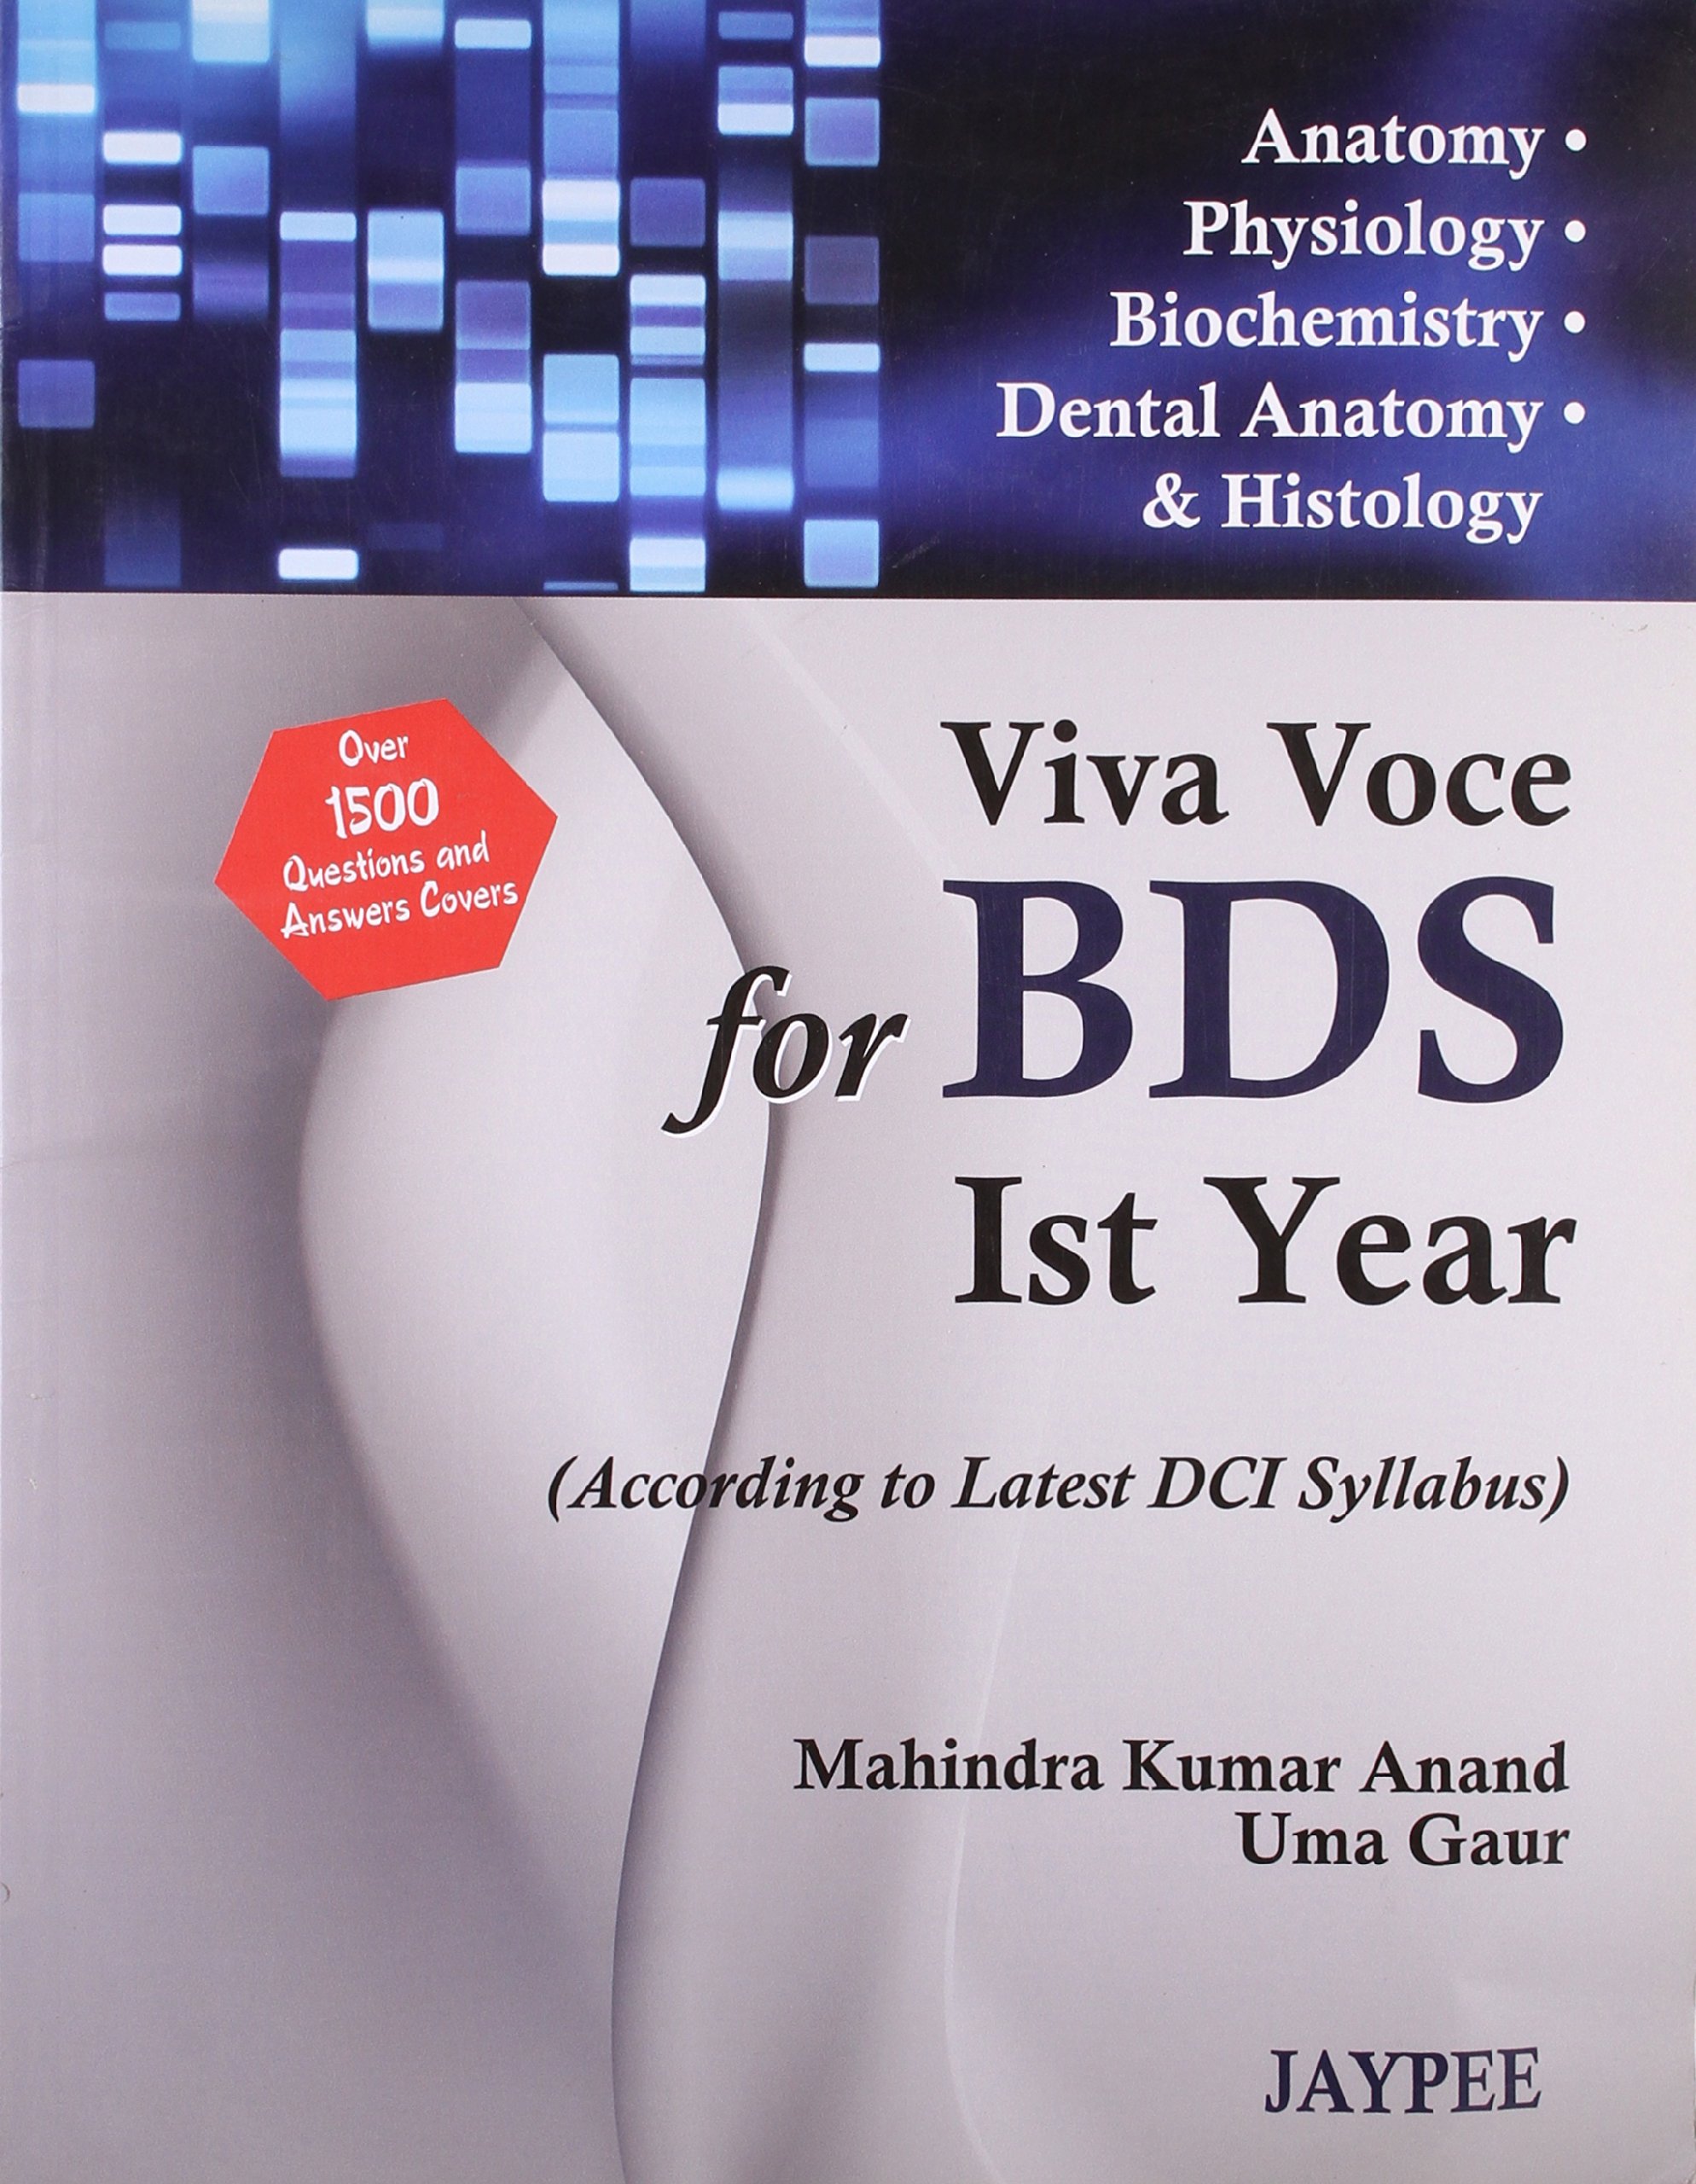 viva-voce-for-bds-ist-yearaccording-to-latest-dci-syllabus